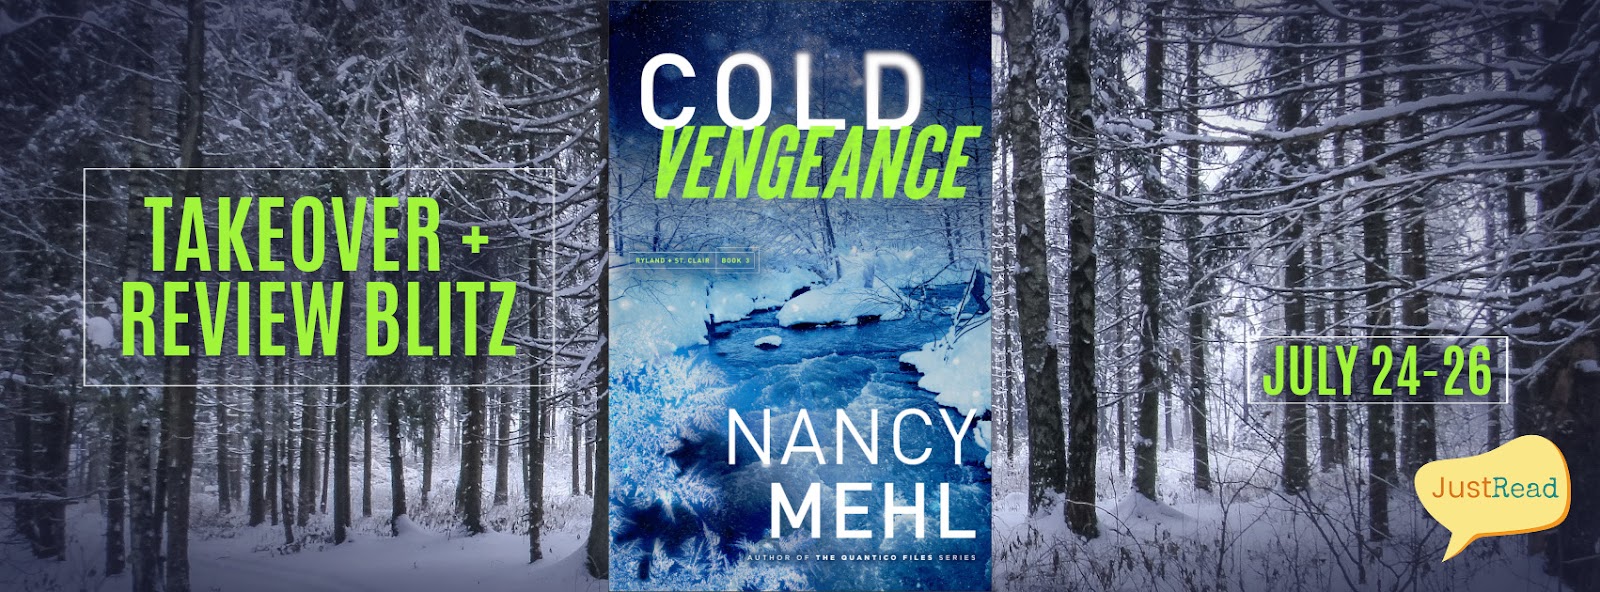 Cold Vengeance JustRead Takeover + Review Blitz